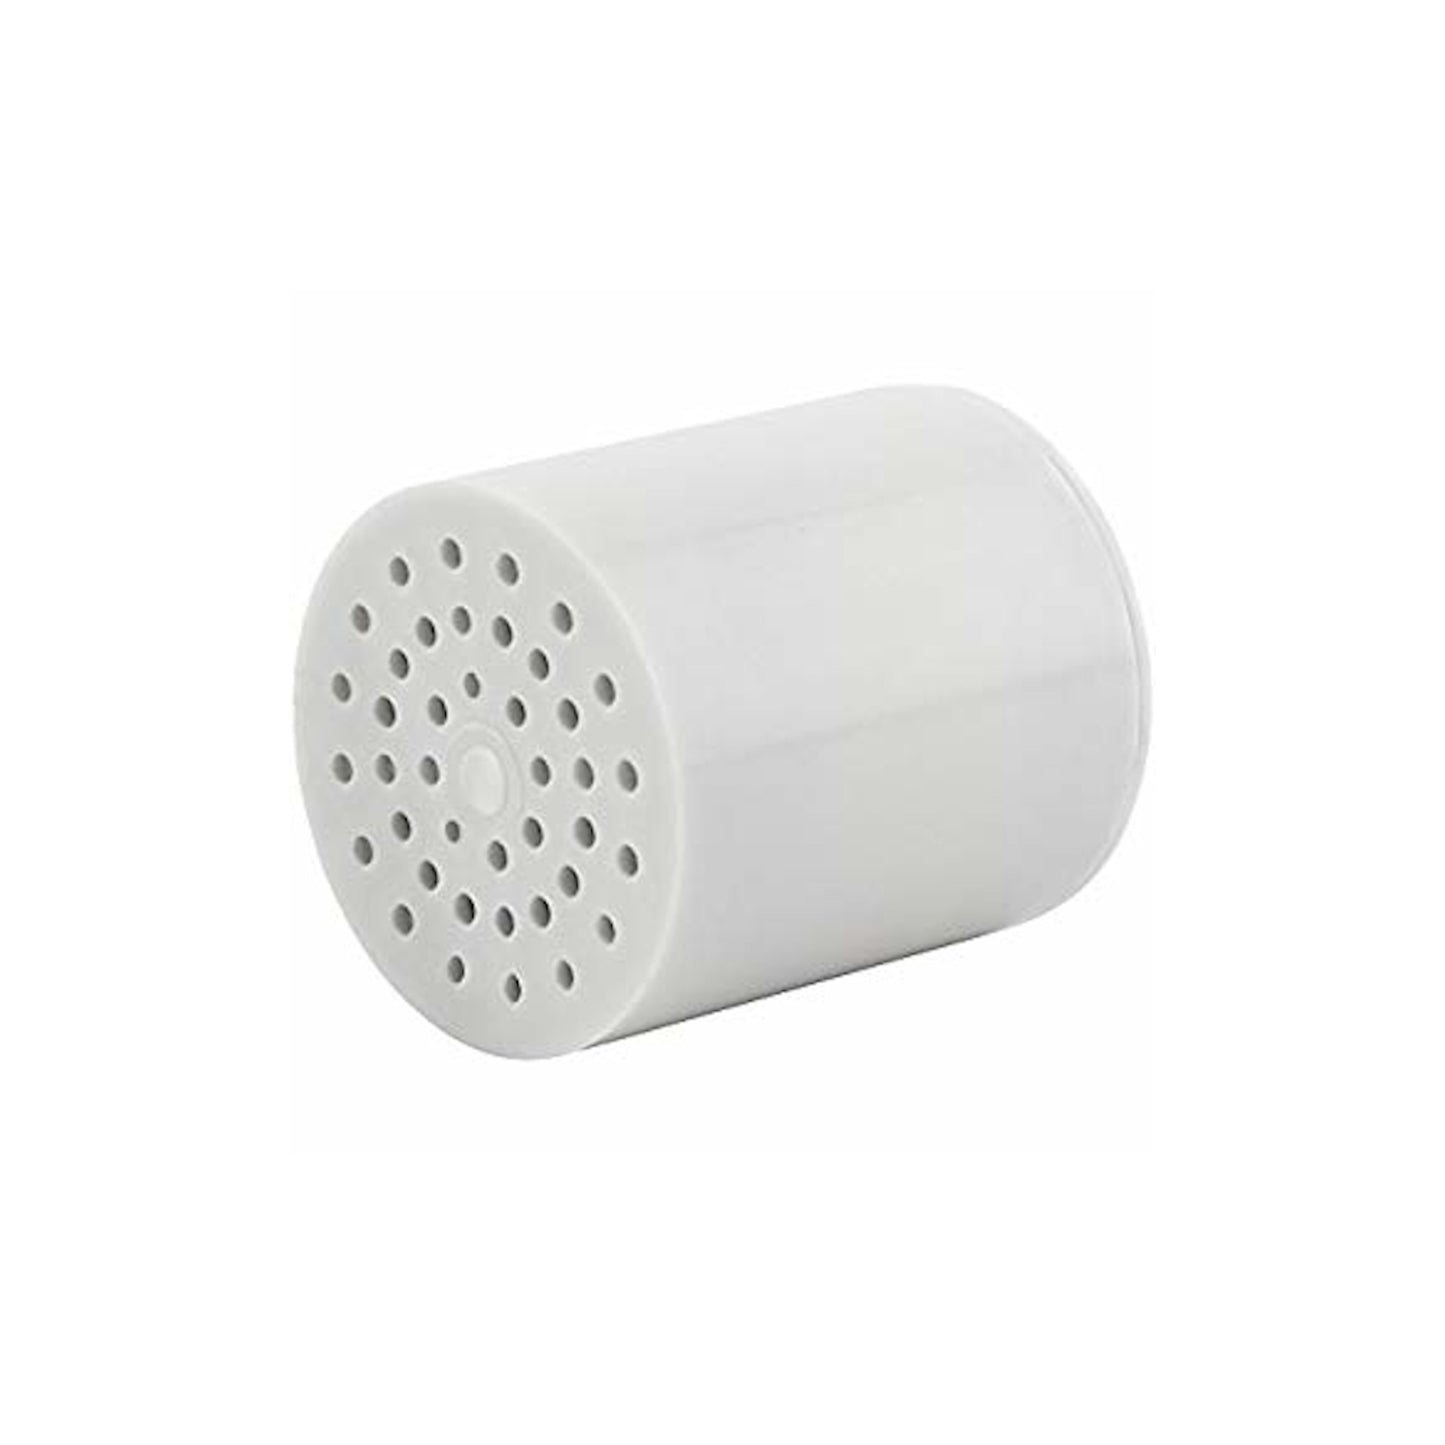 SFC-15 PRO Shower and tap filter cartridge for hard water | Replacement filter